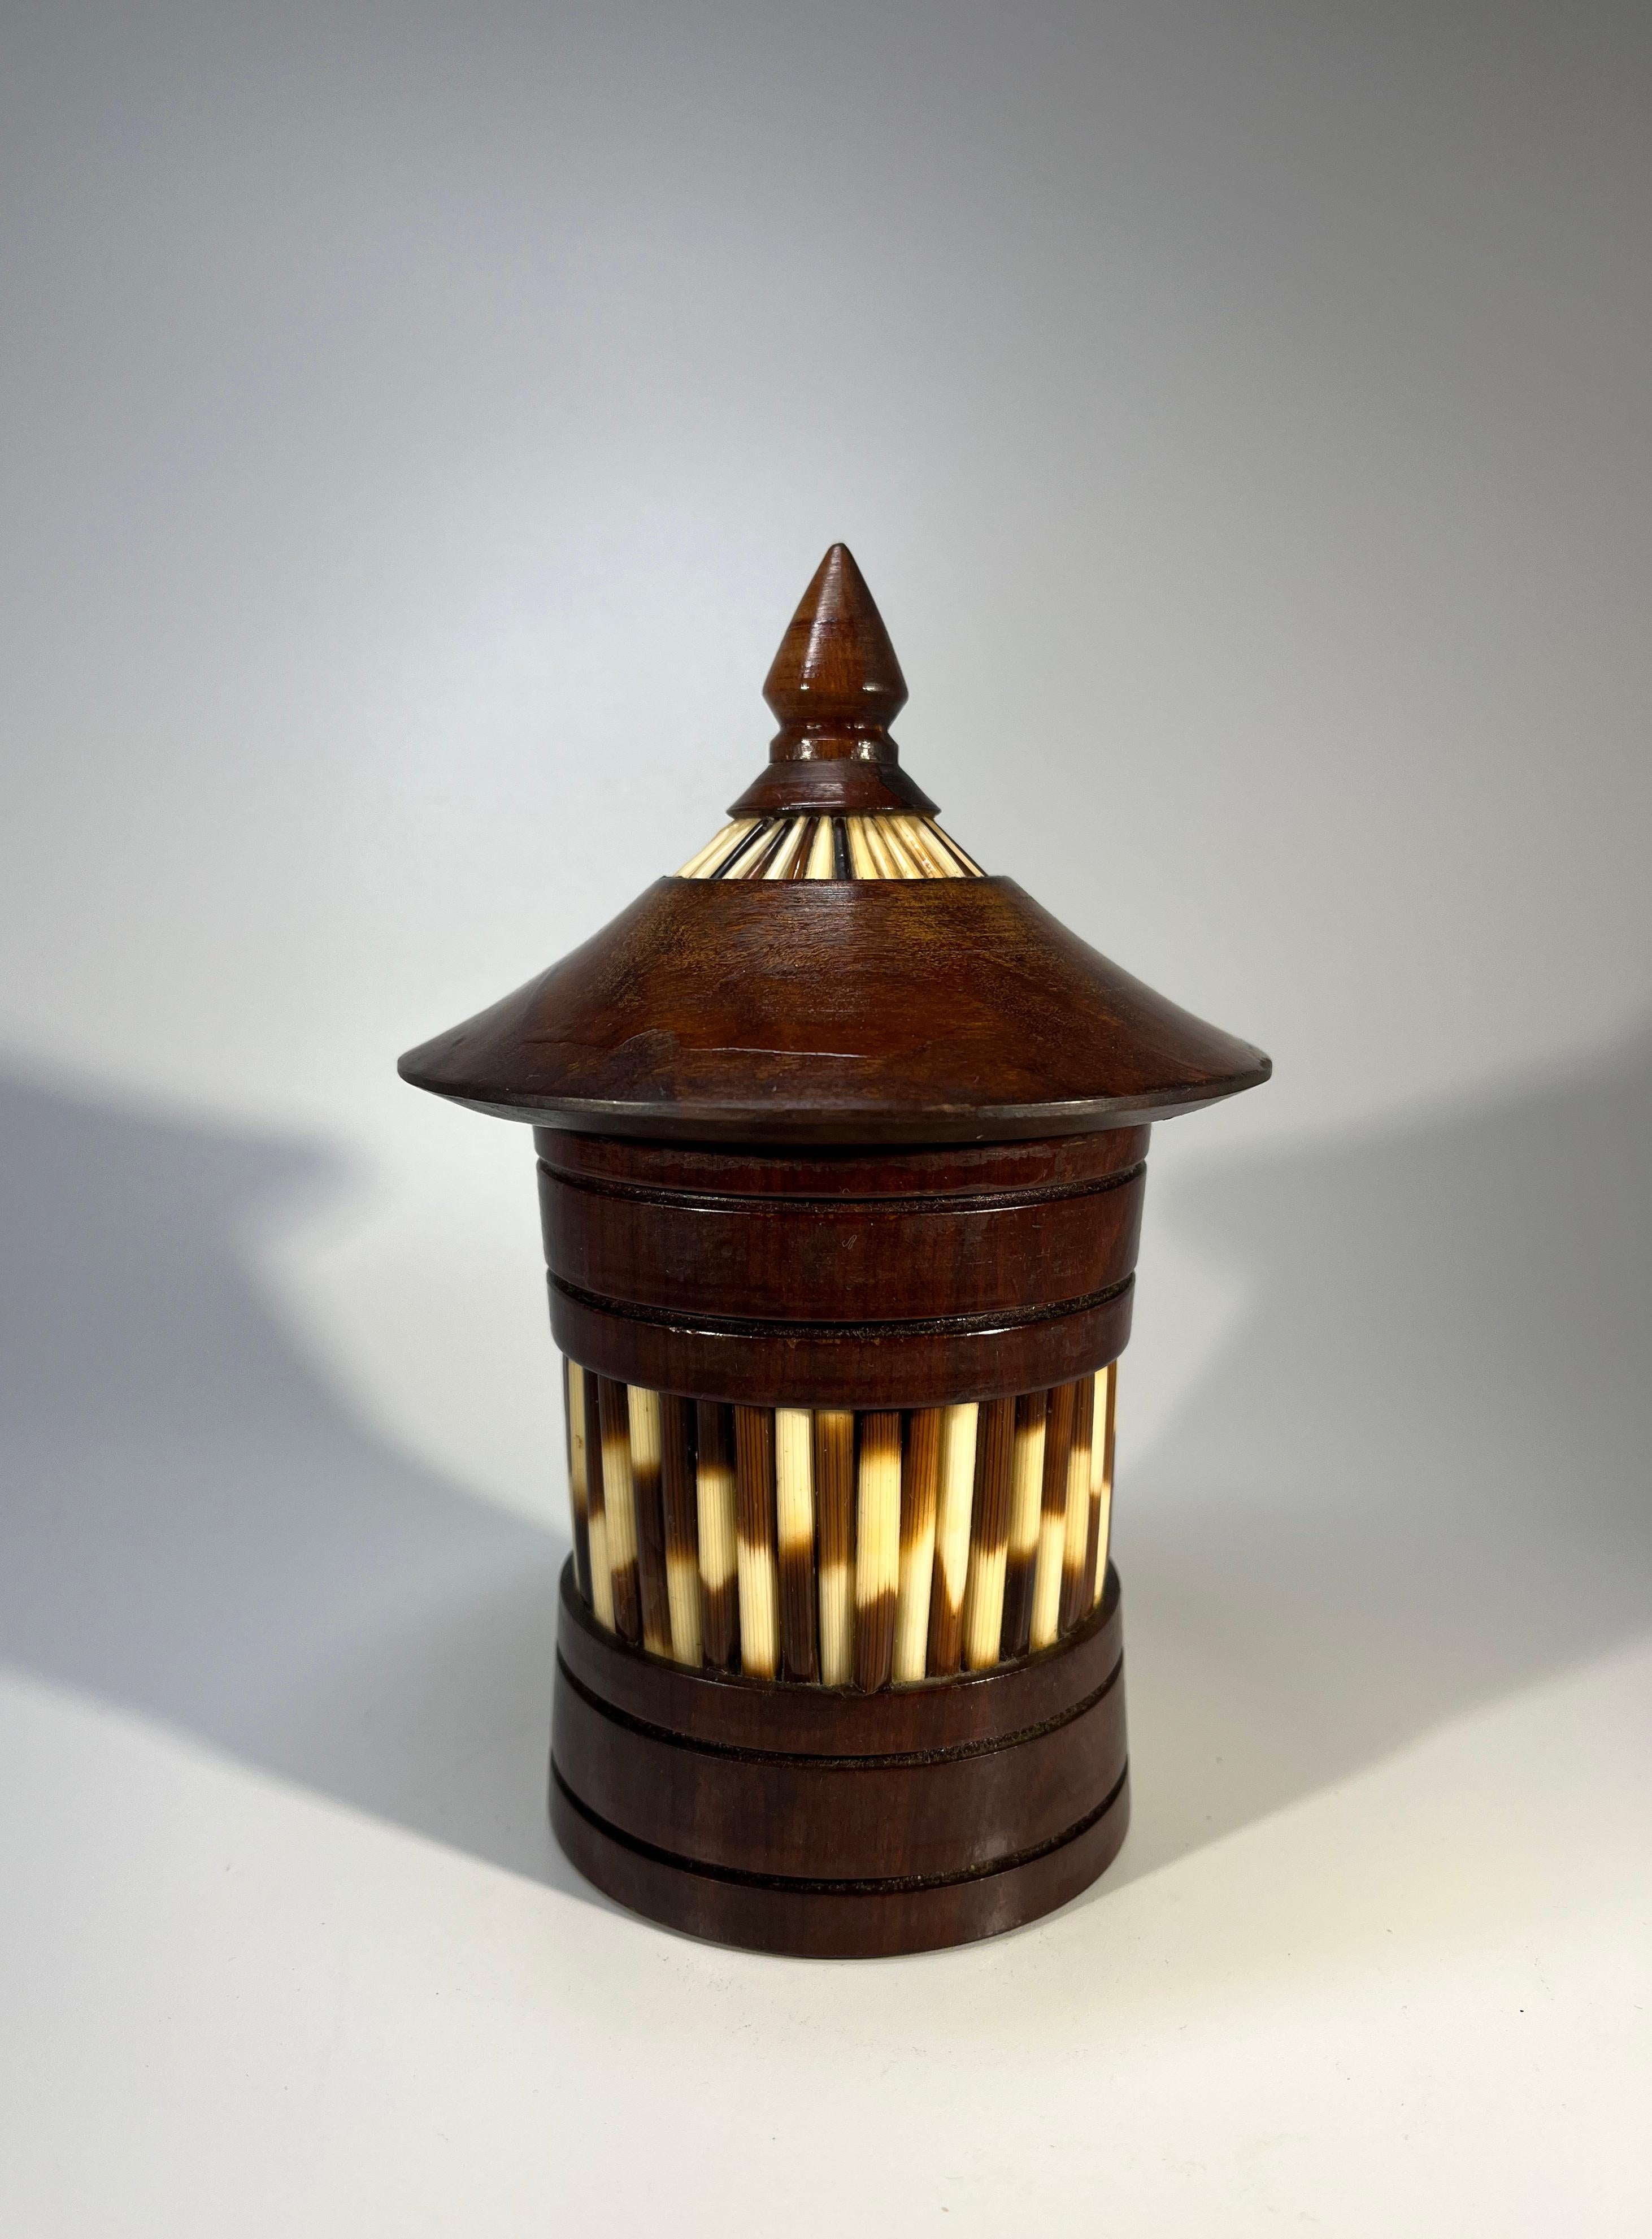 Superb Ceylonese porcupine quill lidded pot in a most unusual conical shape 
Fashioned in dark wood and decorated with quill pieces
All quills are present and in excellent order. Interior appears unused
Circa 1950
Height 6.25 inch, Diameter 4